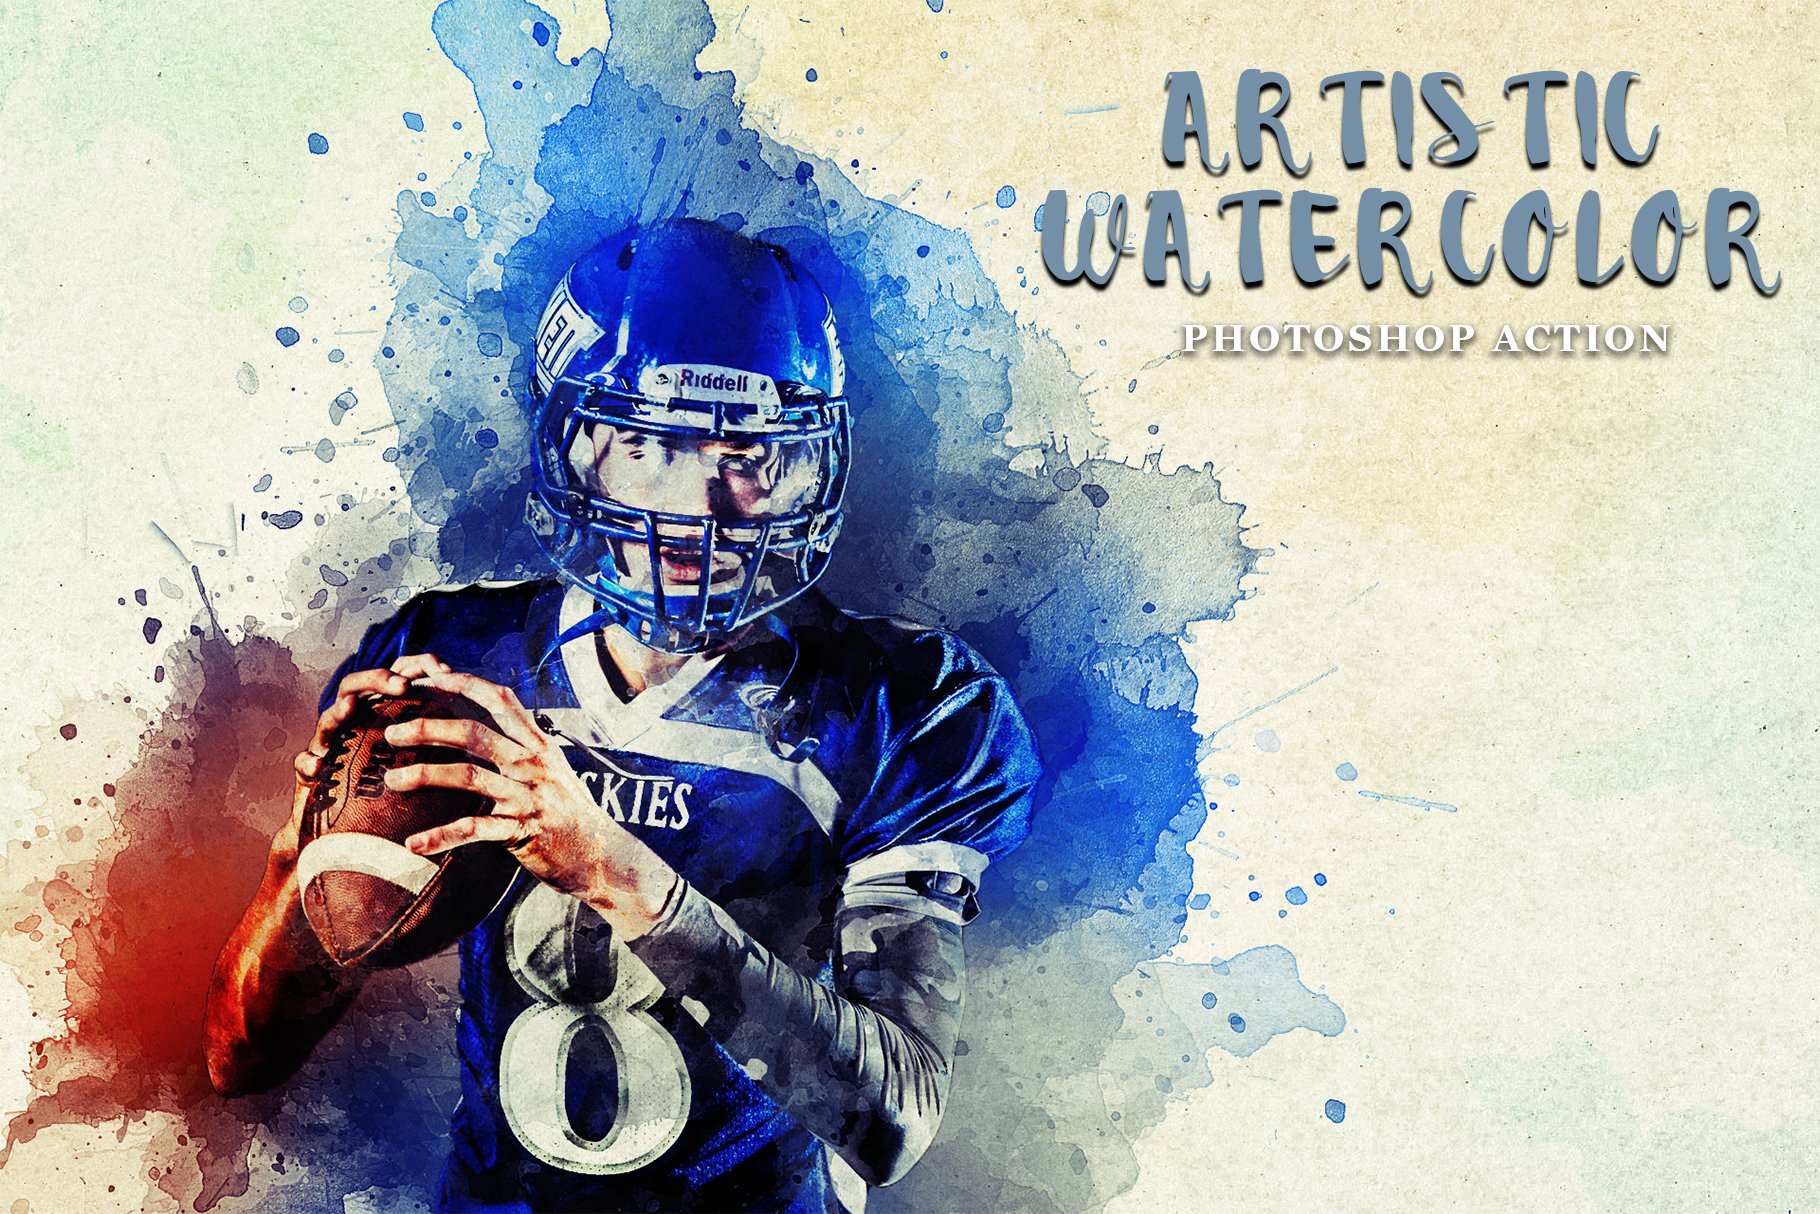 20 in 1 Watercolor Photoshop Actionspreview image.